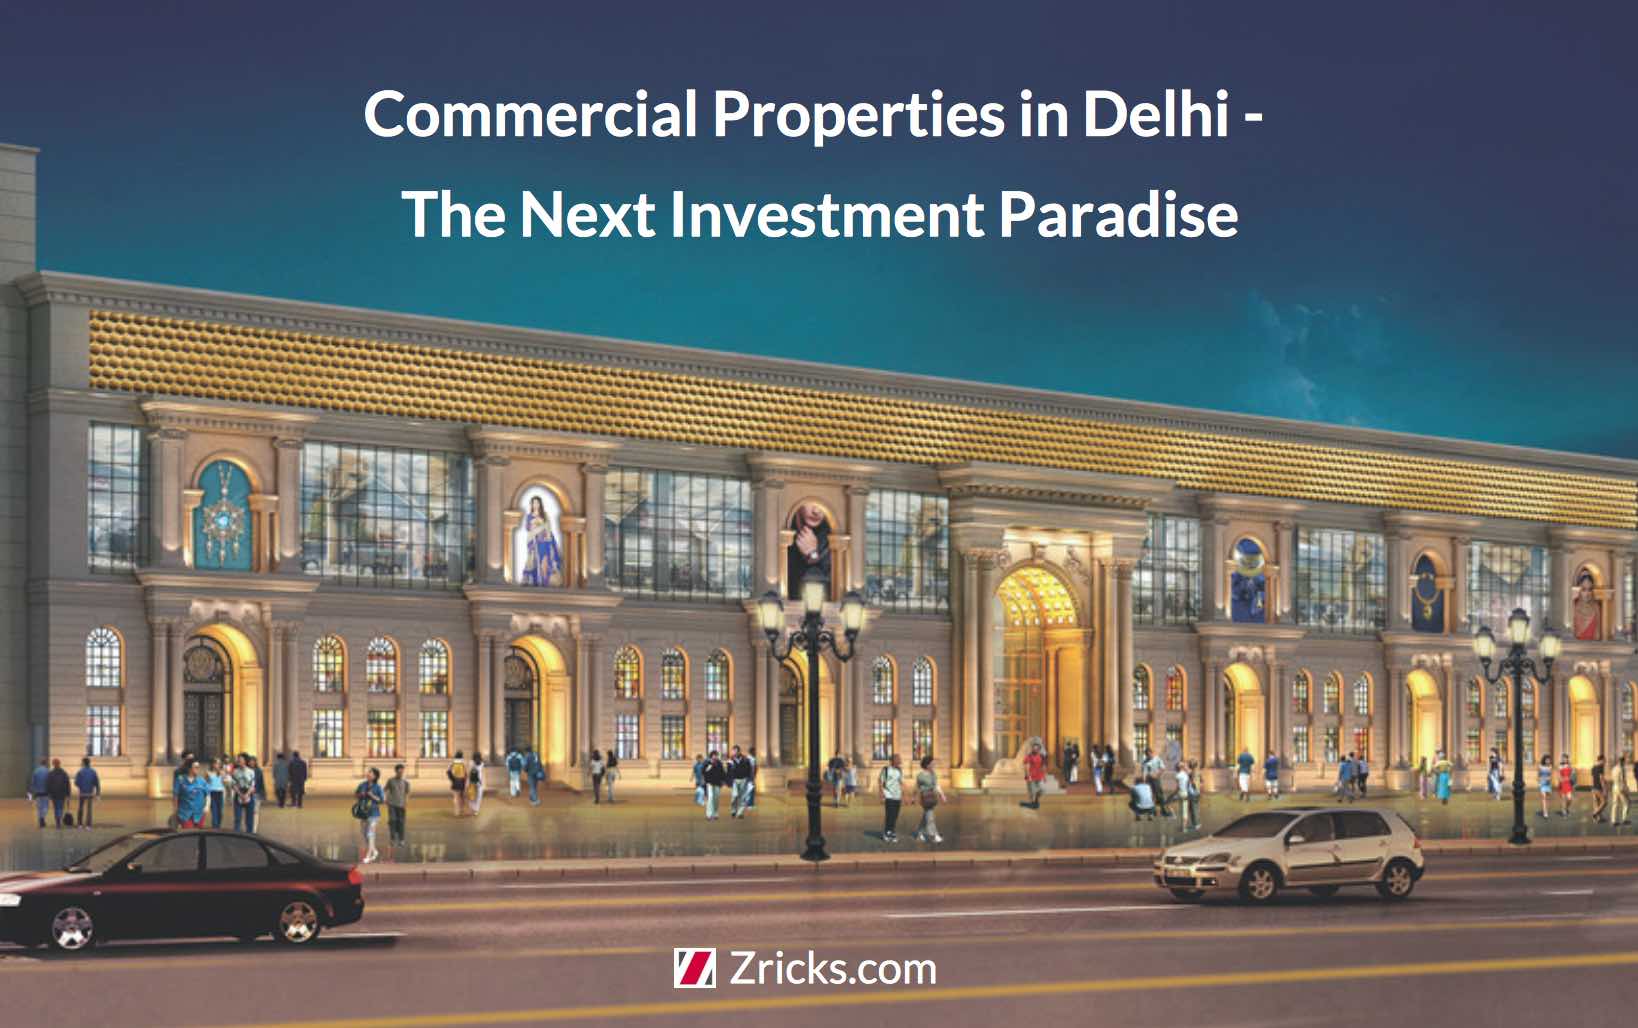 Commercial Properties in Delhi - The Next Investment Paradise Update